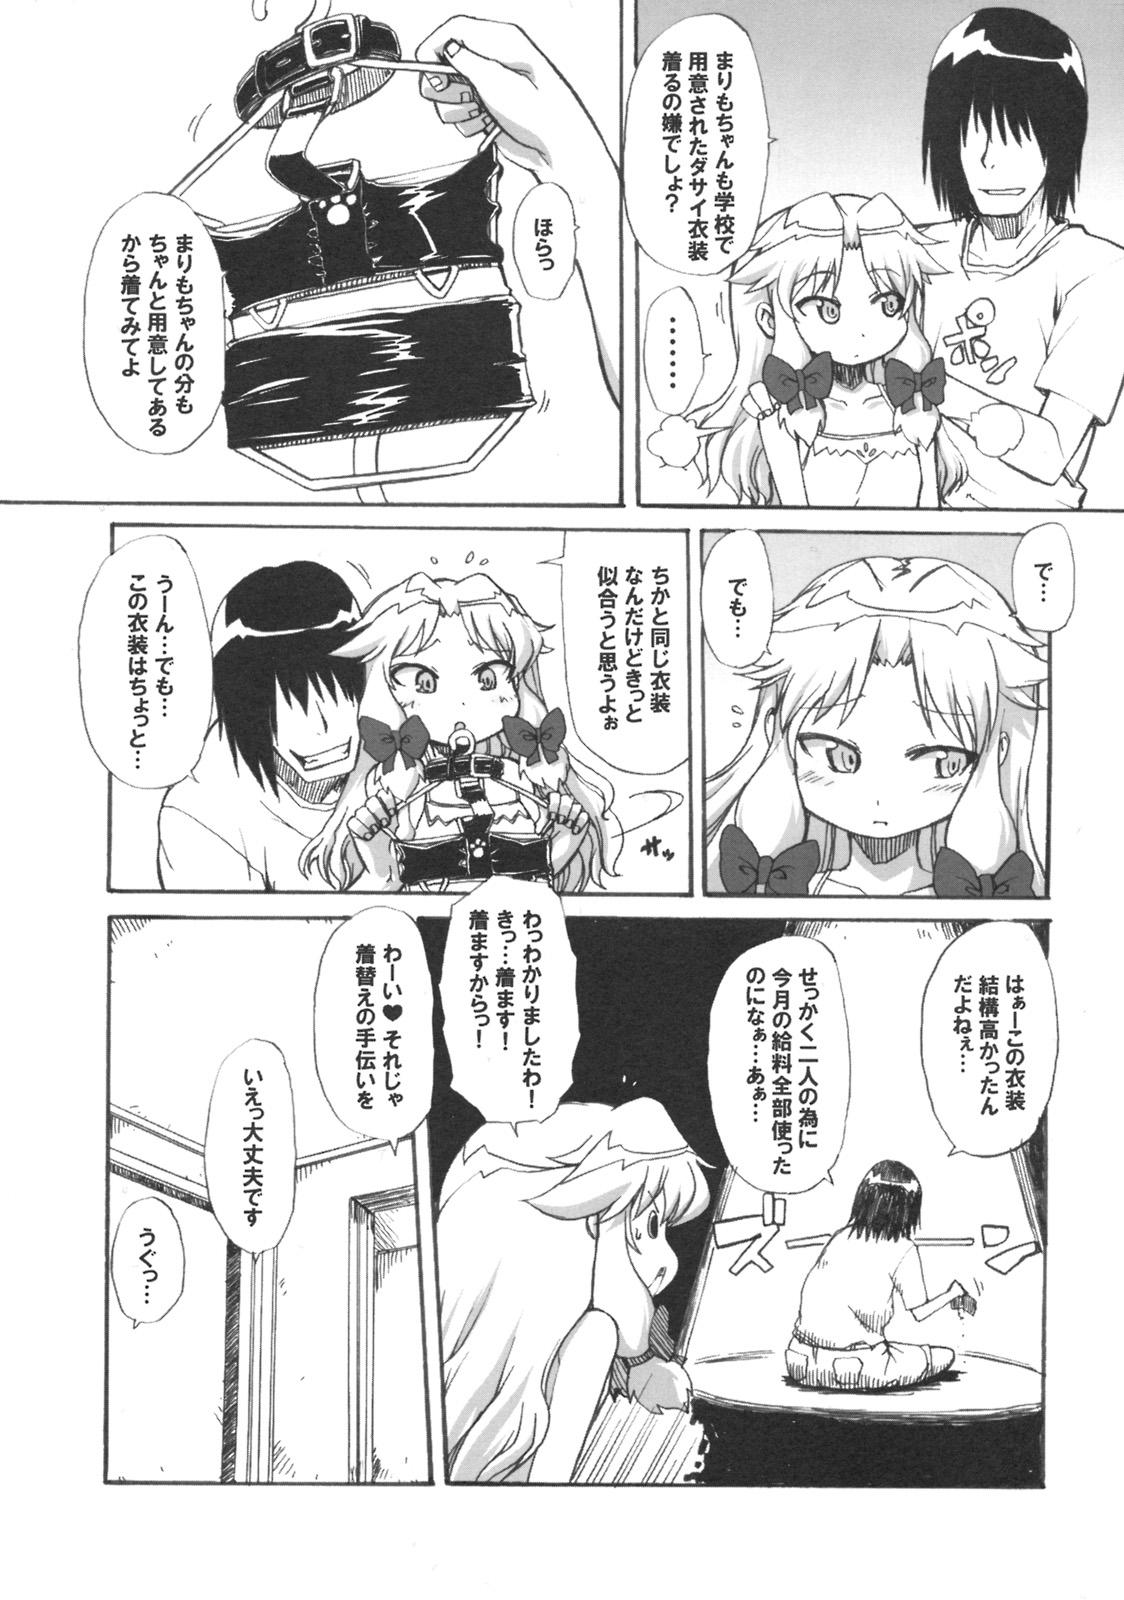 Audition Muboubi Musume 2 Sex - Page 6